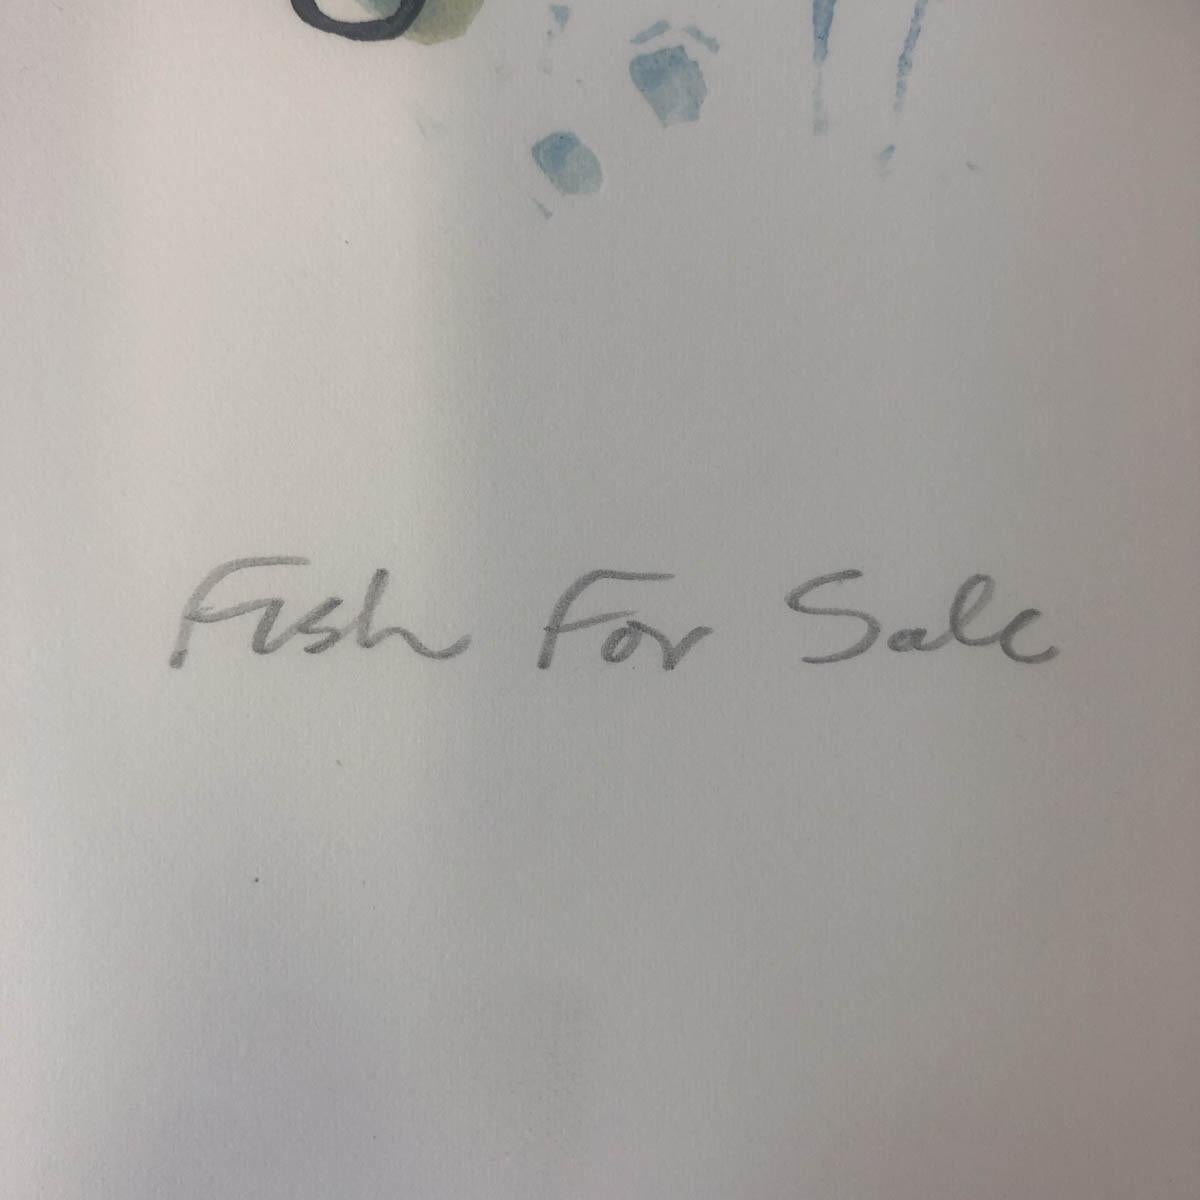 Colin Moore
Fish For Sale
Limited Edition Linocut Print of 100
3 Block Lino Print
Image Size: H 40cm x W 30cm
Sheet Size: H 50cm x W 38cm
Please note that in situ images are purely an indication of how a piece may look.

Fish For Sale is a limited